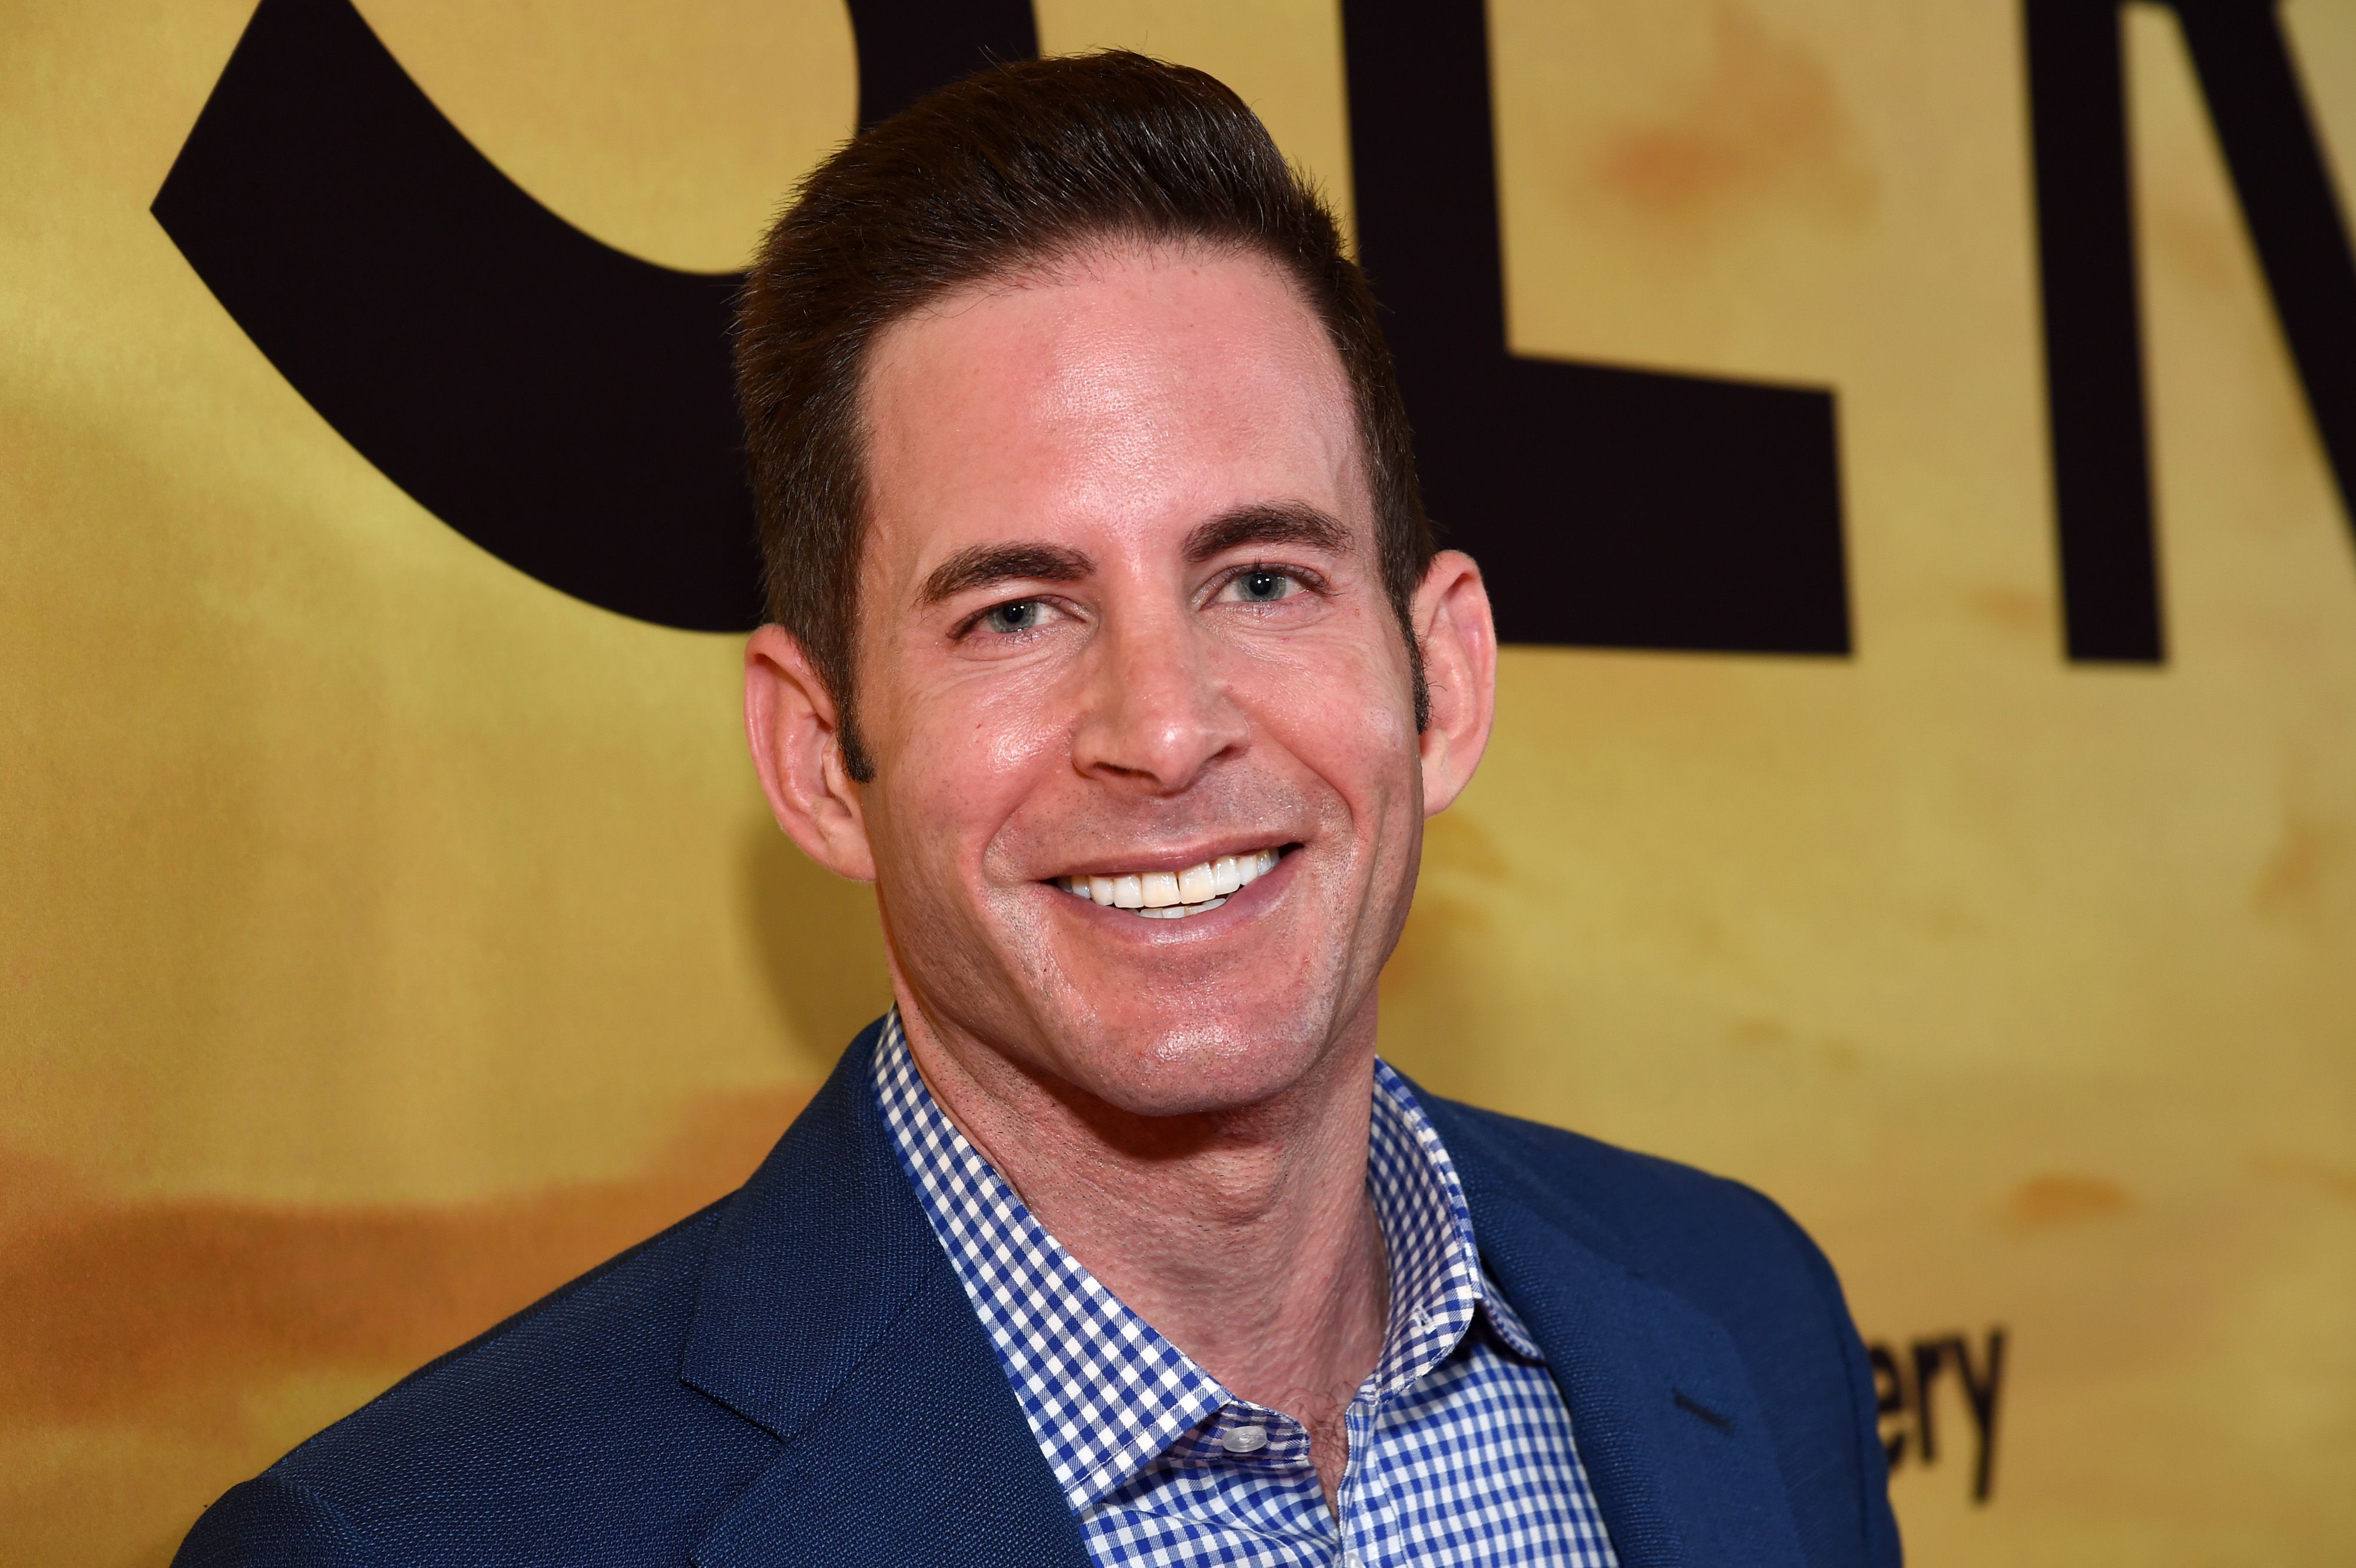 Tarek El Moussa at Discovery's "Serengeti" premiere on July 23, 2019, in Beverly Hills, California. | Source: Getty Images